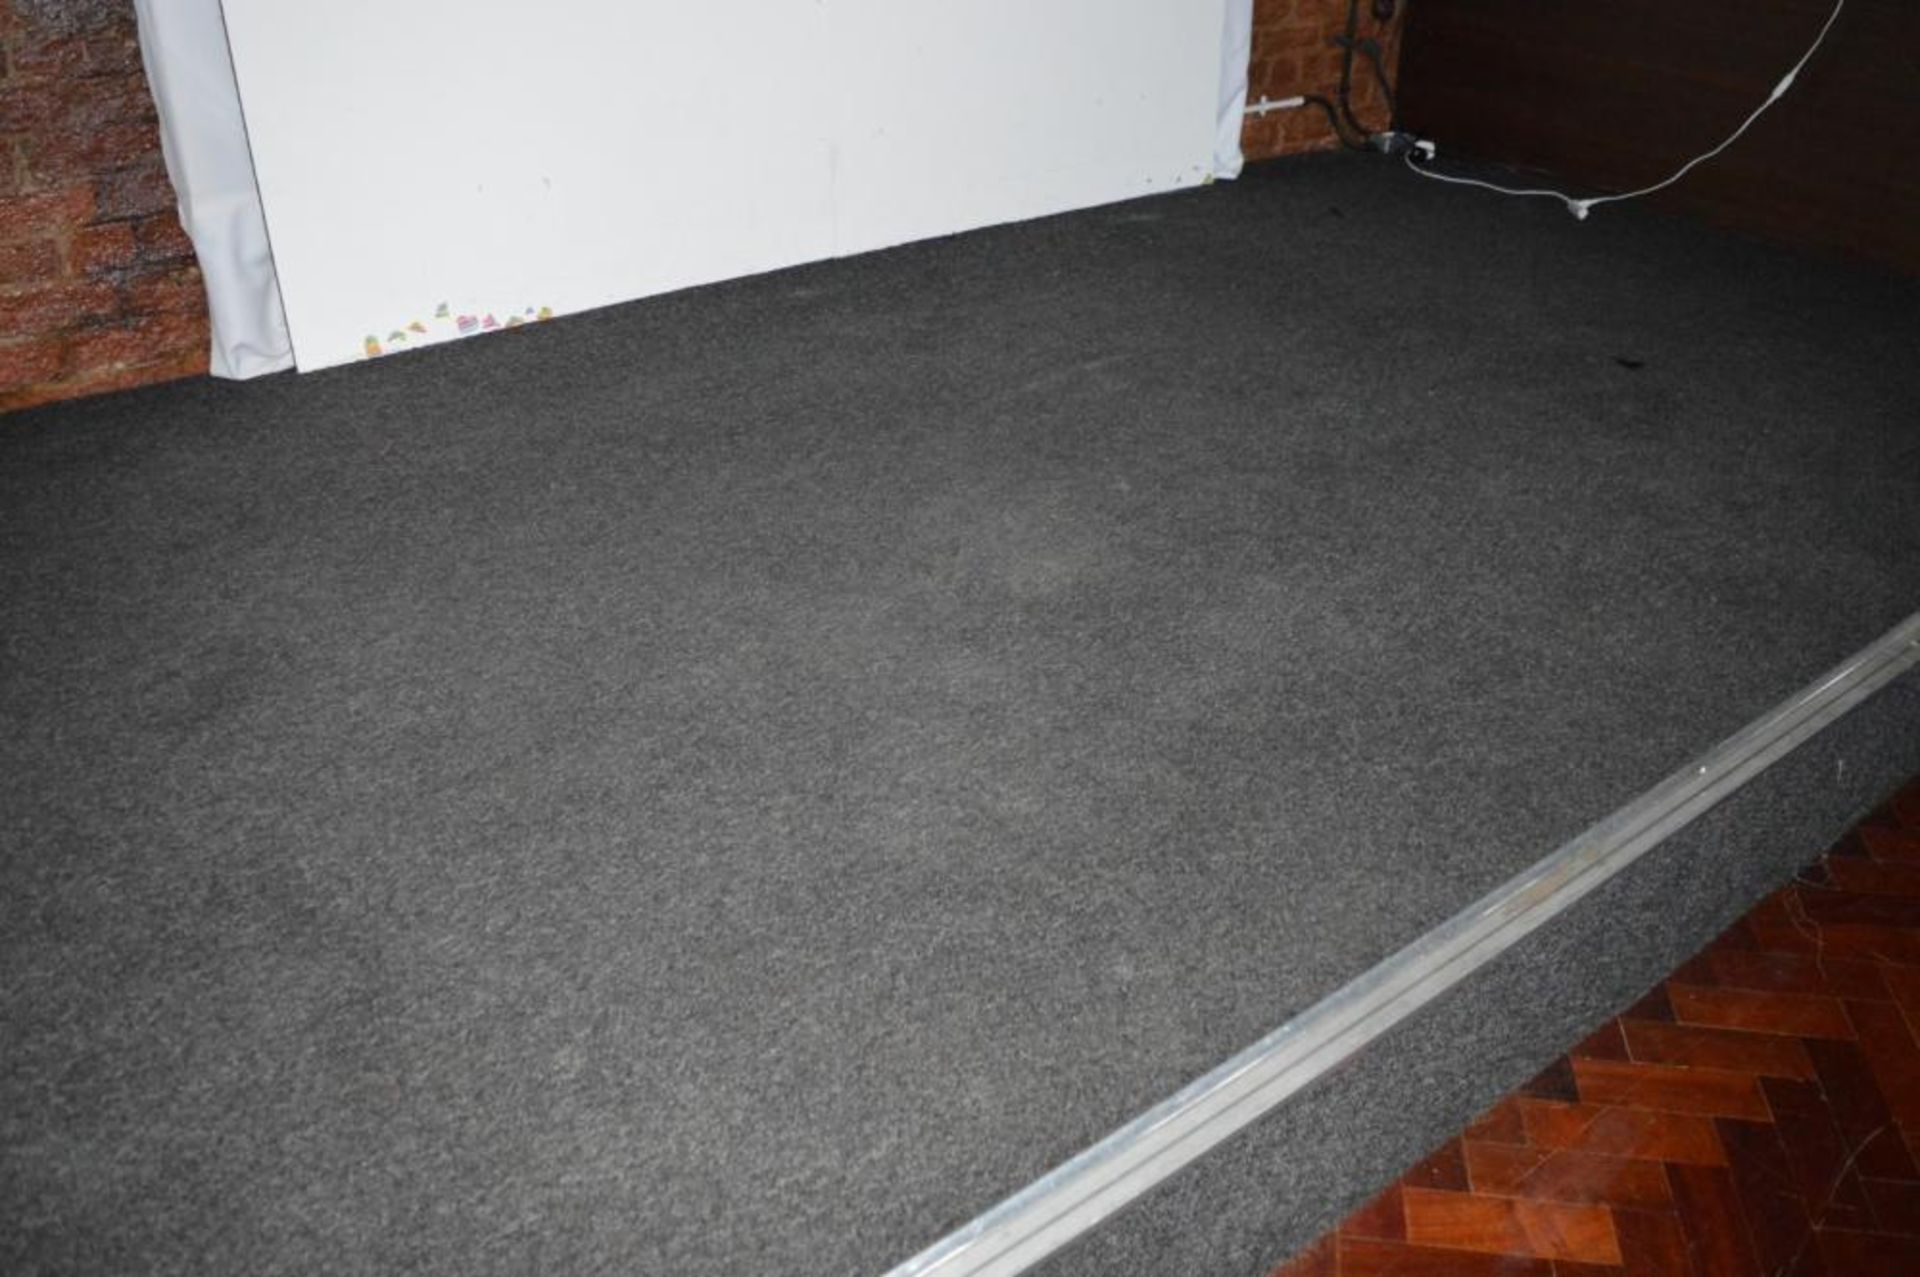 1 x Carpeted Stage Platform With Overhead Suspended Illuminated Cover and Access Steps - Platform Di - Image 9 of 9